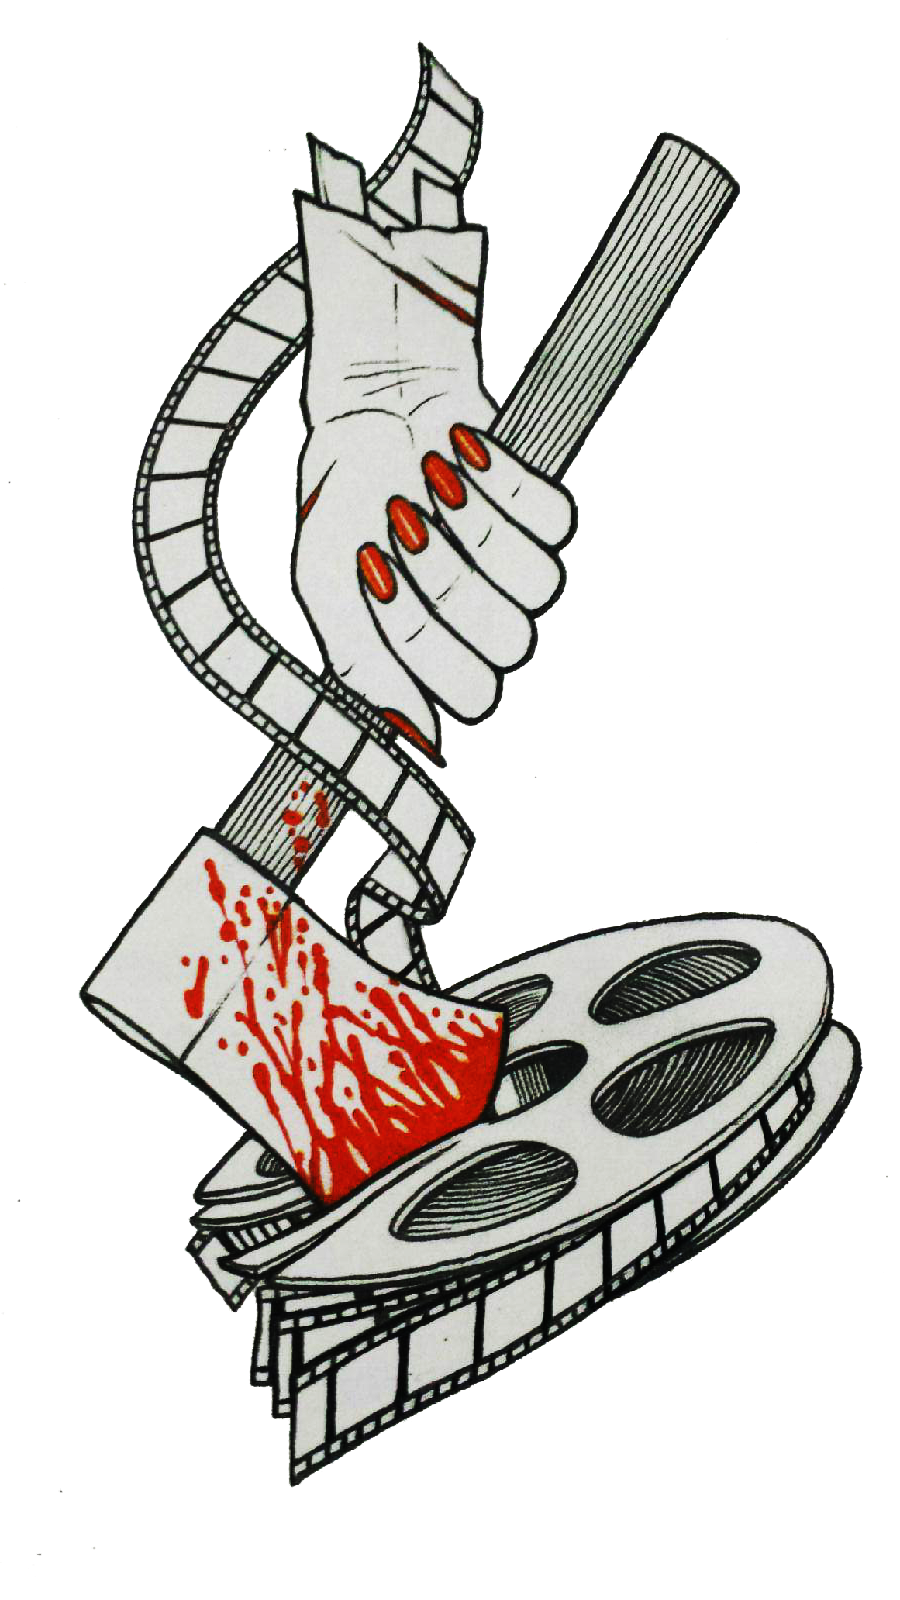 About women in horror. Movie clipart film festival